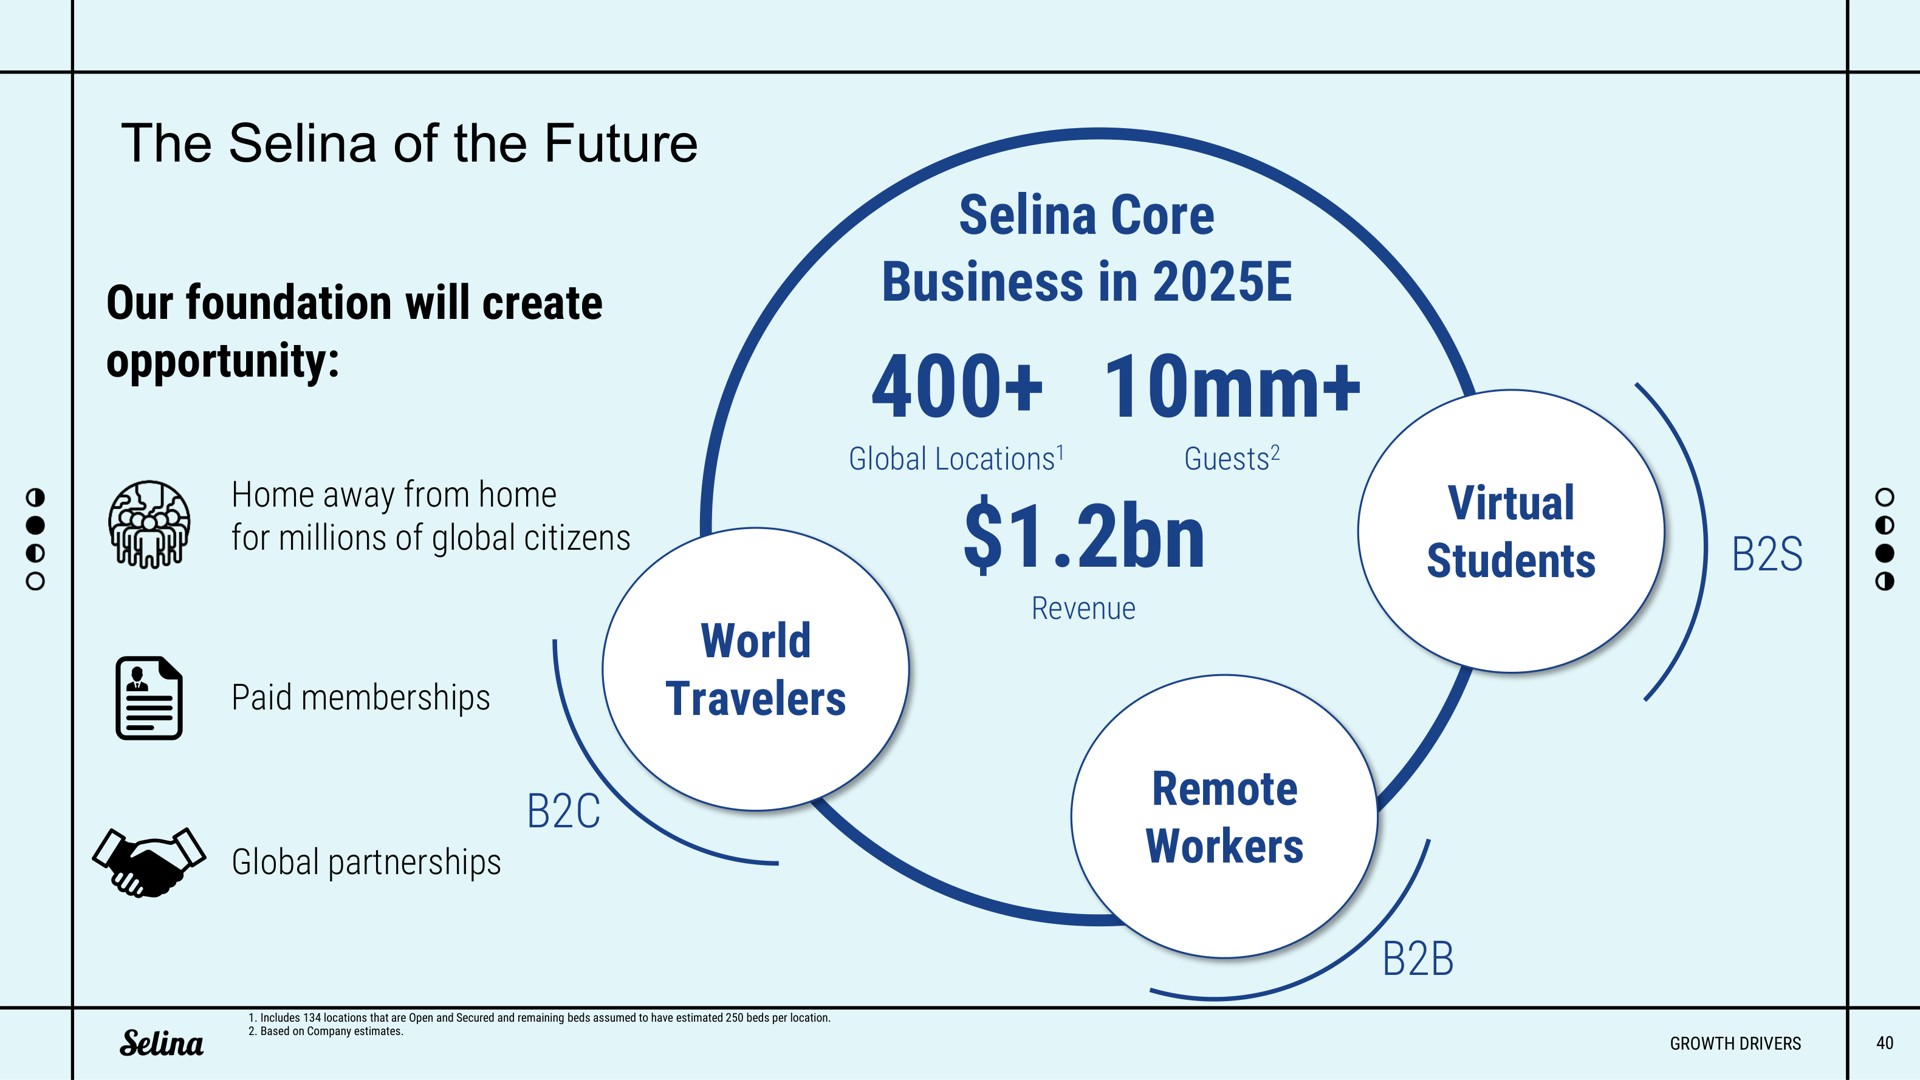 the of the future our foundation will create opportunity world travelers core business in virtual students remote workers | Selina